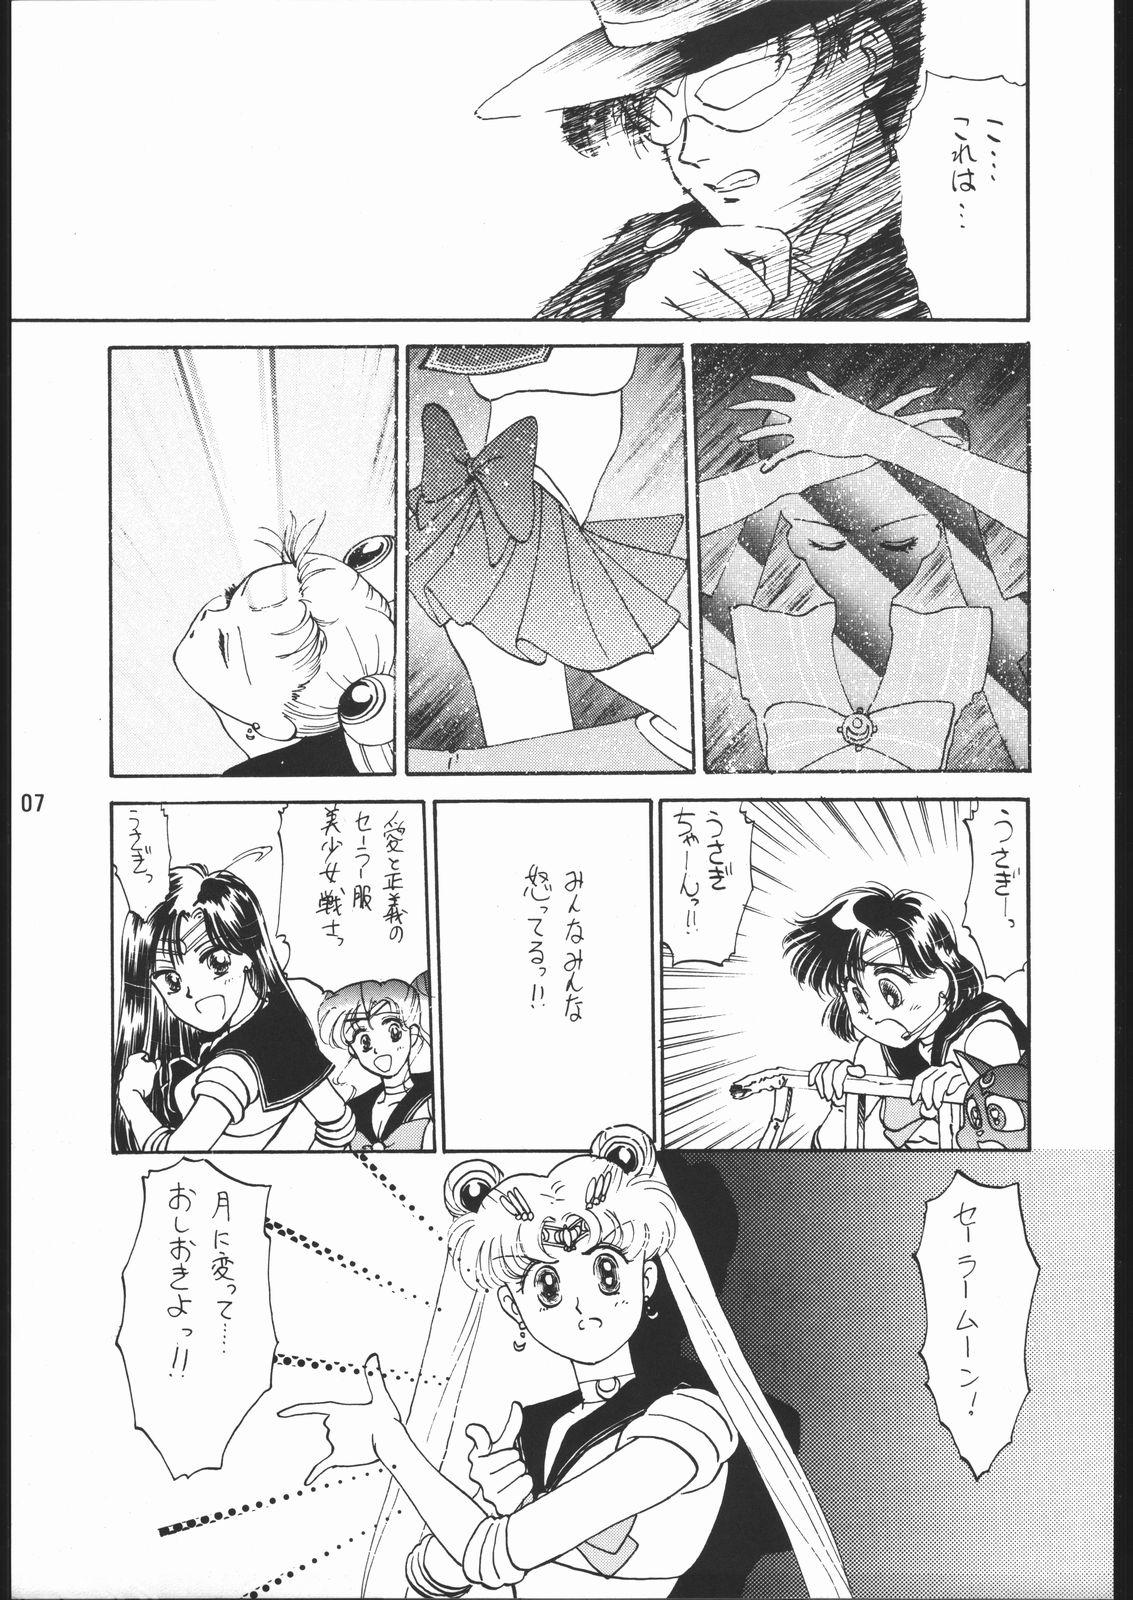 Anal Licking うさぎがピョン!! - Sailor moon Ohmibod - Page 6